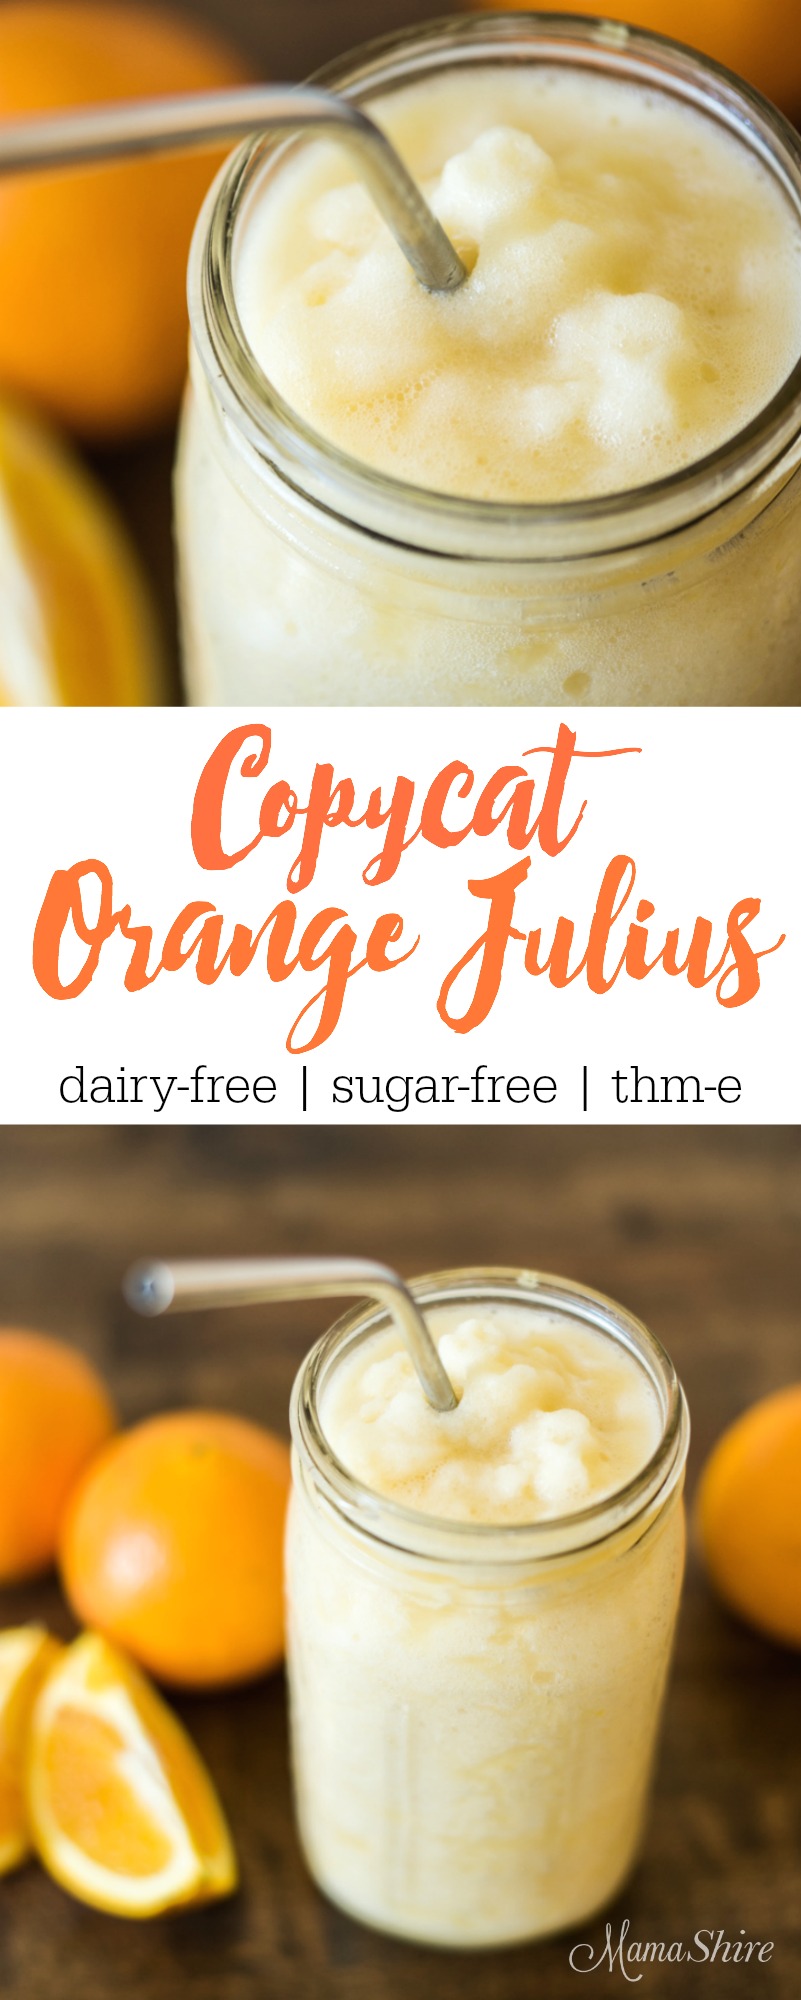 Try this delicious and healthy Copycat Orange Julius that's dairy free! It's super easy to make and so refreshing! Gluten-free, Sugar-free, THM-E